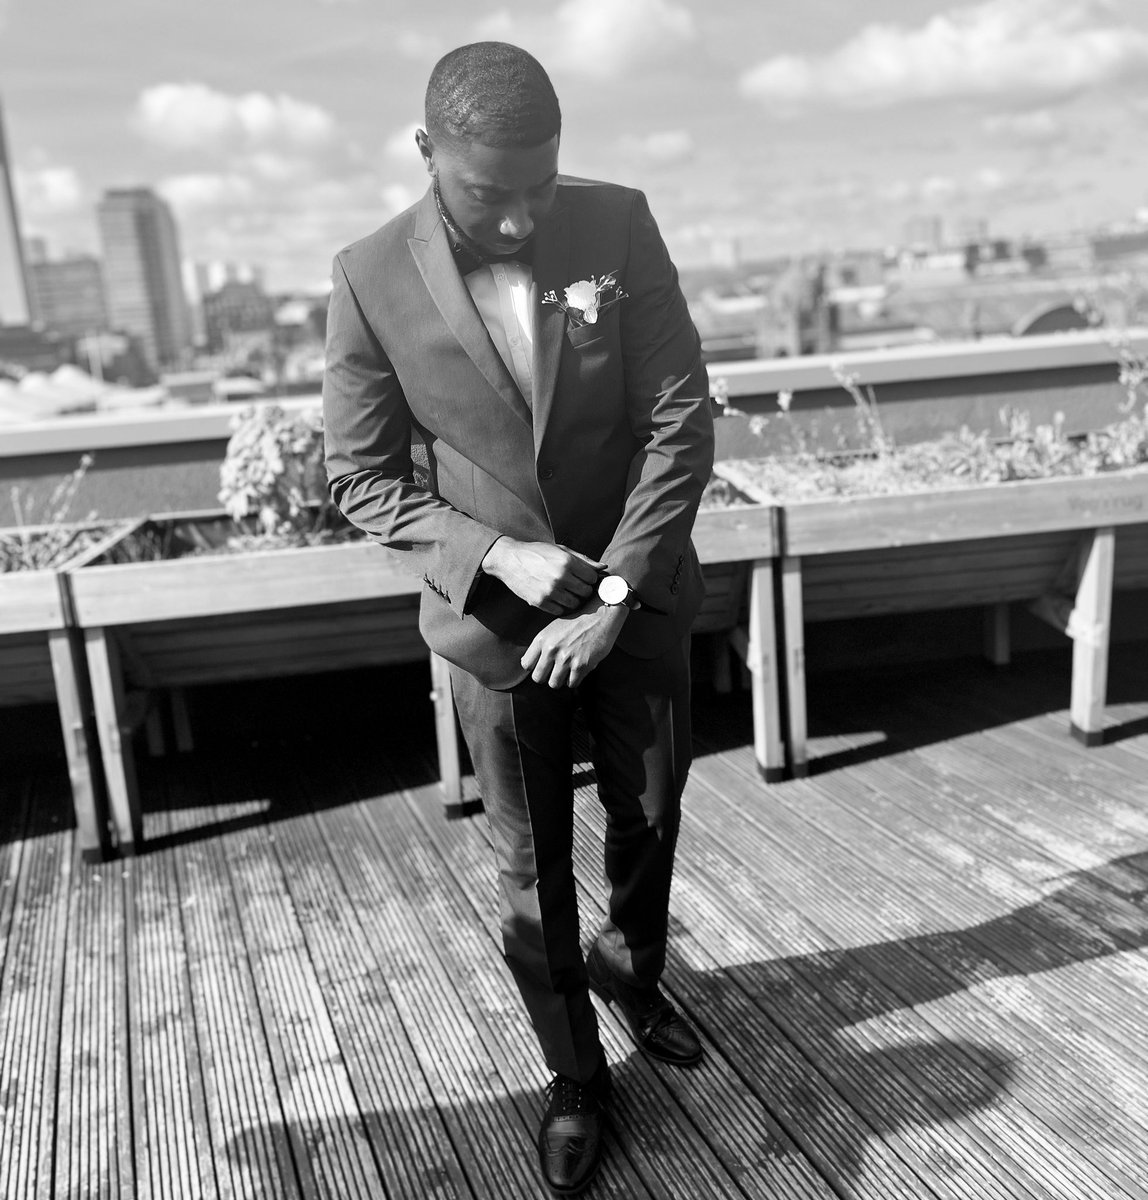 Wedding settings

Love to see growth, joy and happiness with my people. Living life and enjoying what God is doing 

#groomsmen #wedding #suit #joy #happiness #love #peace #growth #godisgood #actor #cleanupnice #uk #views #photography #creative #blackactor #suited #suitandtie